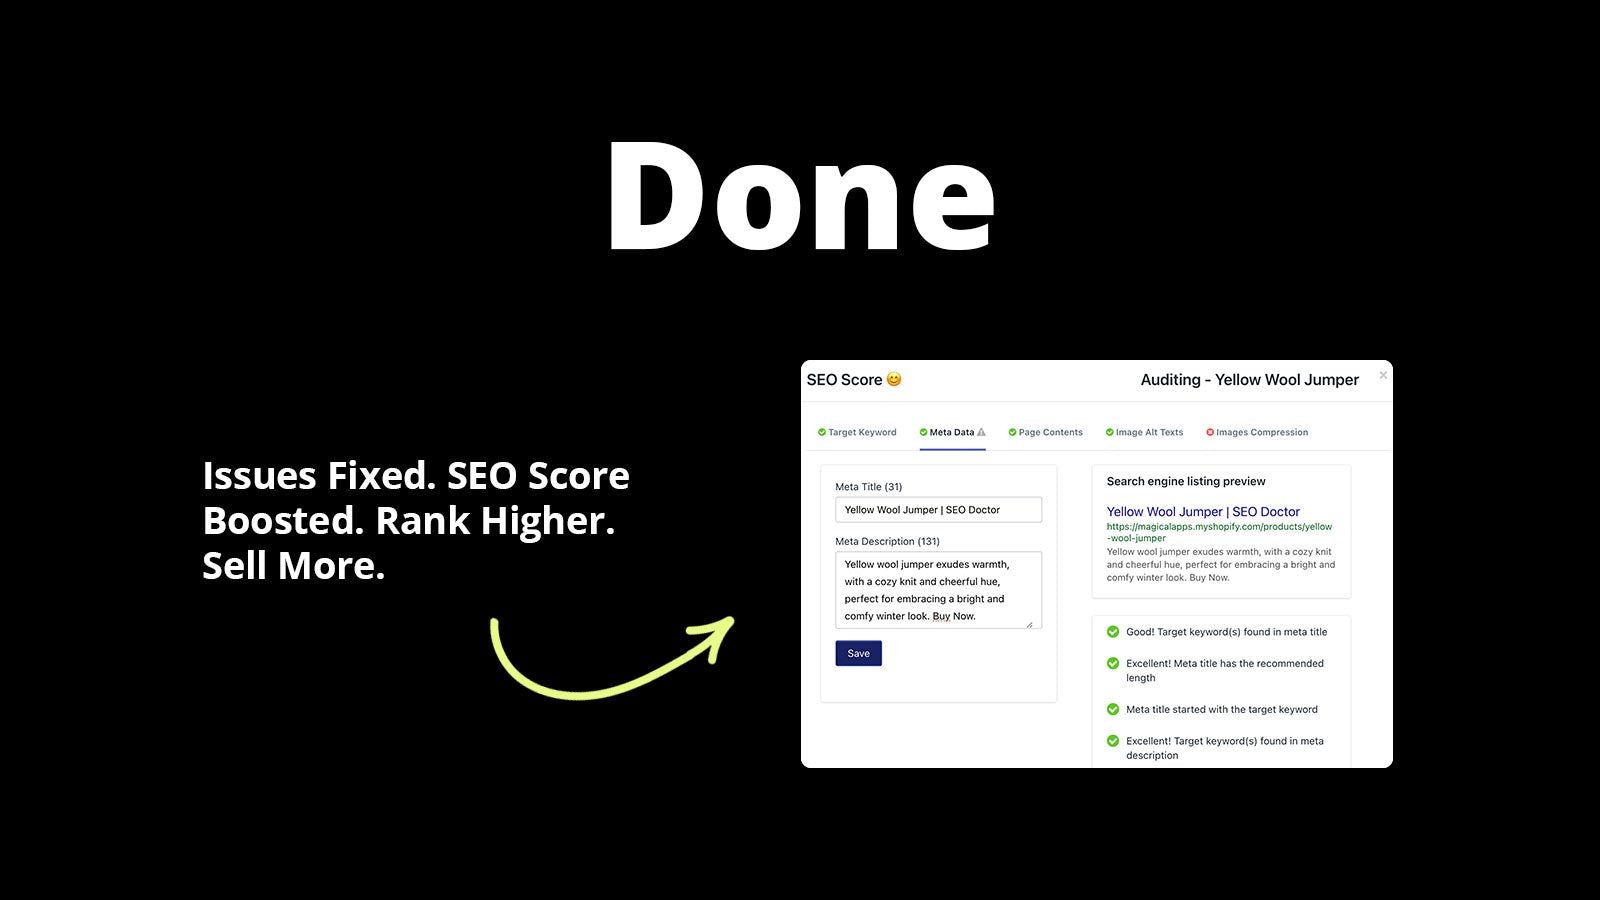 Done - Issues fixed. SEO score boosted. Rank higher. Sell more.